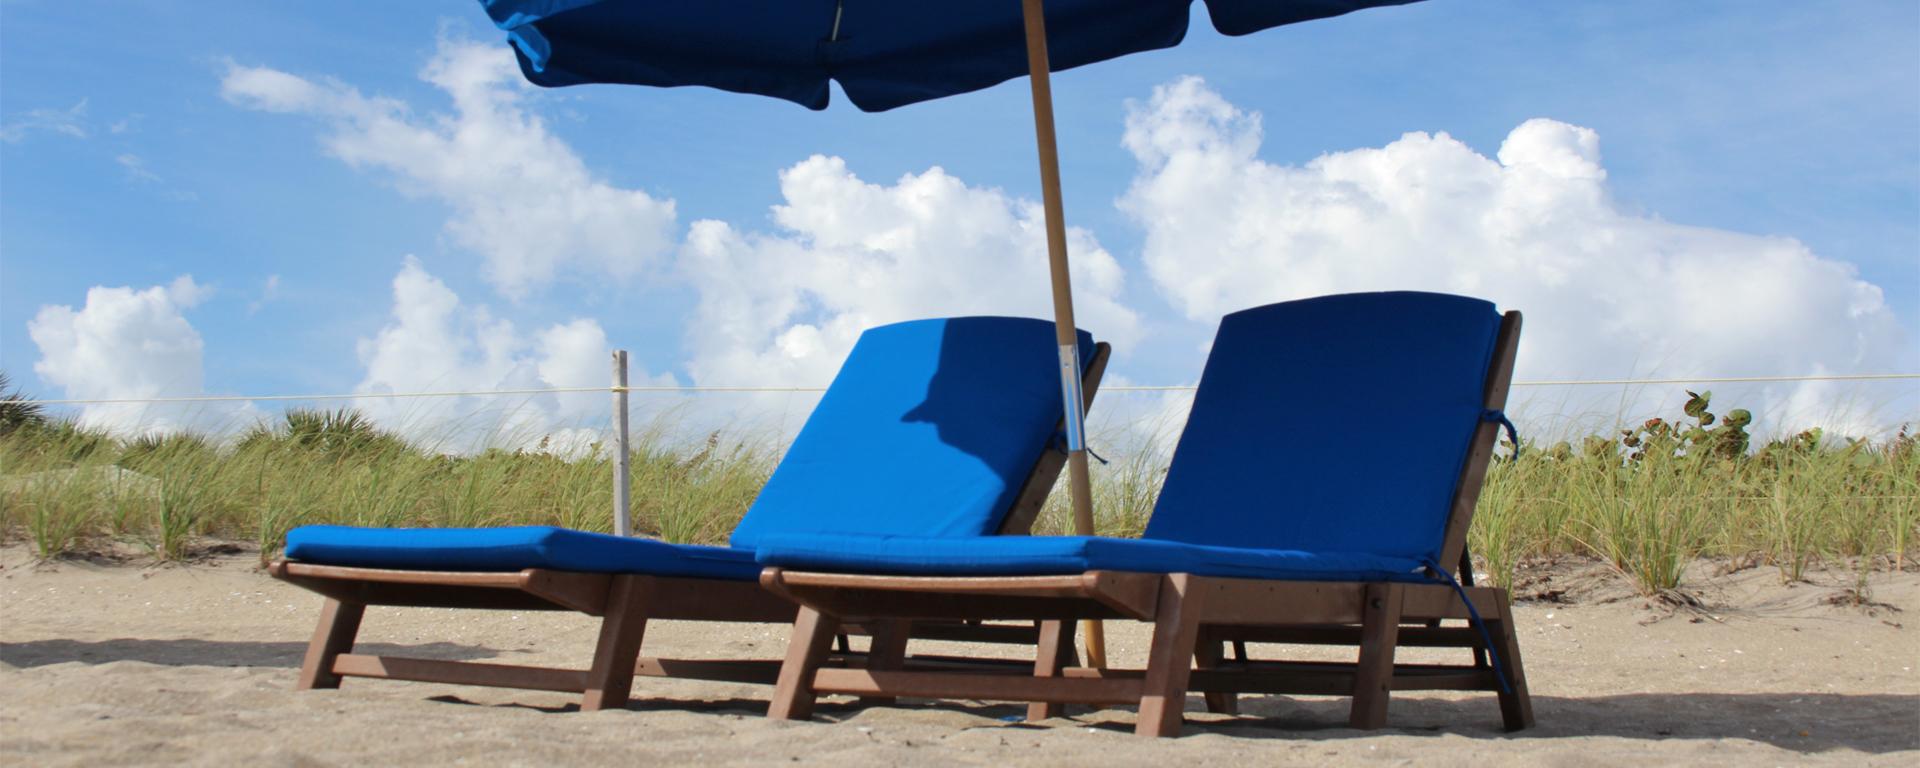 Creatice Beach Chair Rental Positano for Large Space